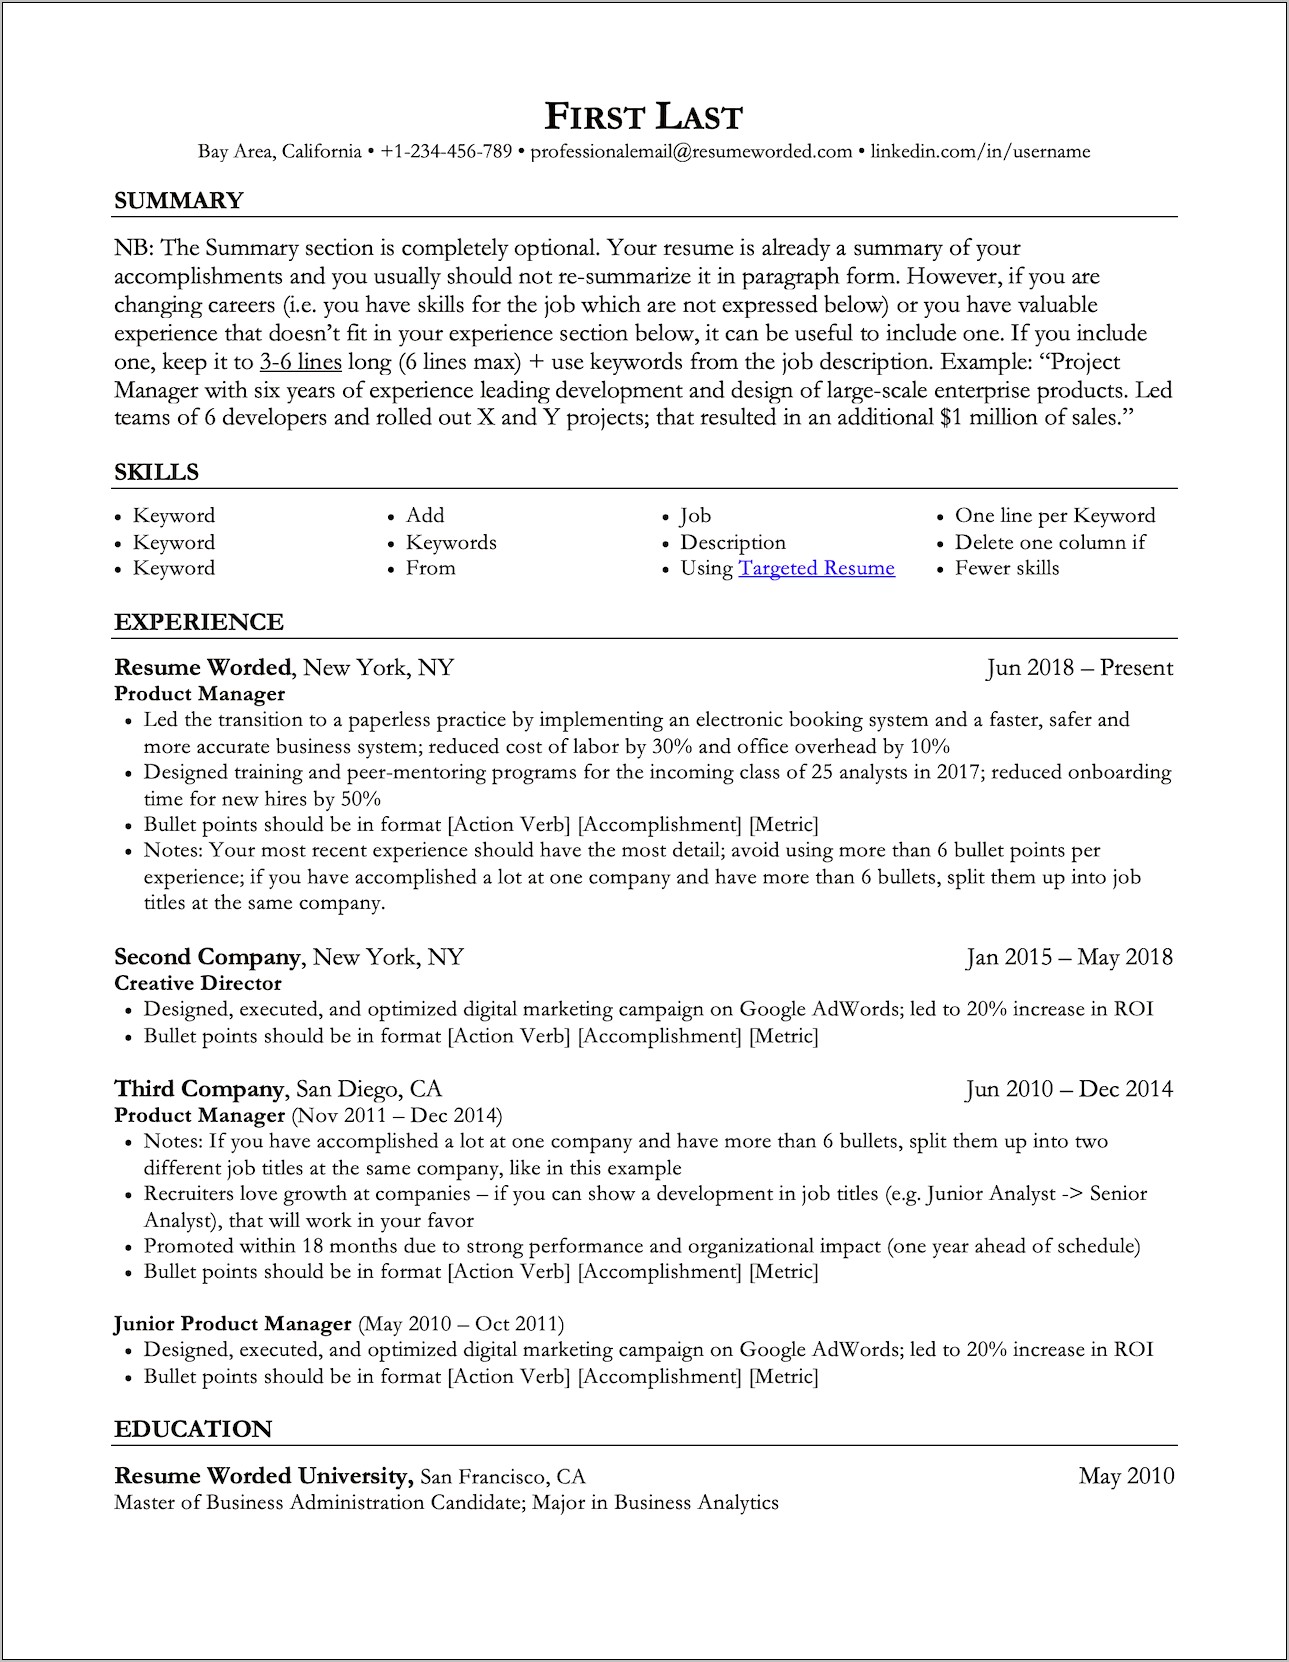 Resume Summary Of Qualifications Career Change